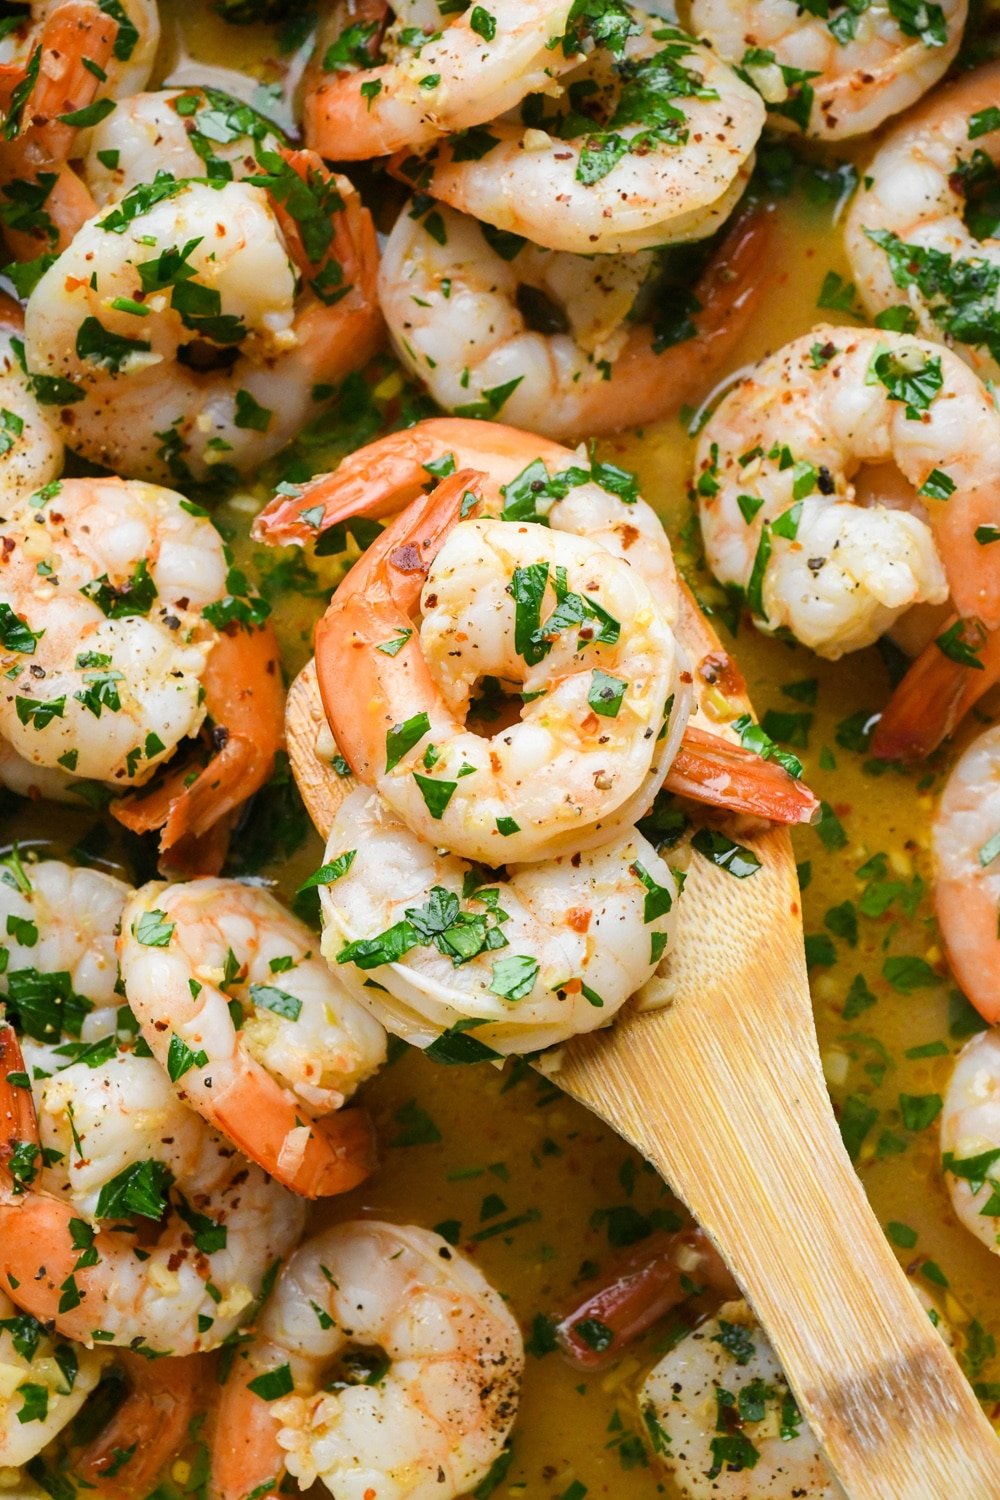 A wooden spatula lifting out several shrimp from prepared skillet of shrimp scampi.